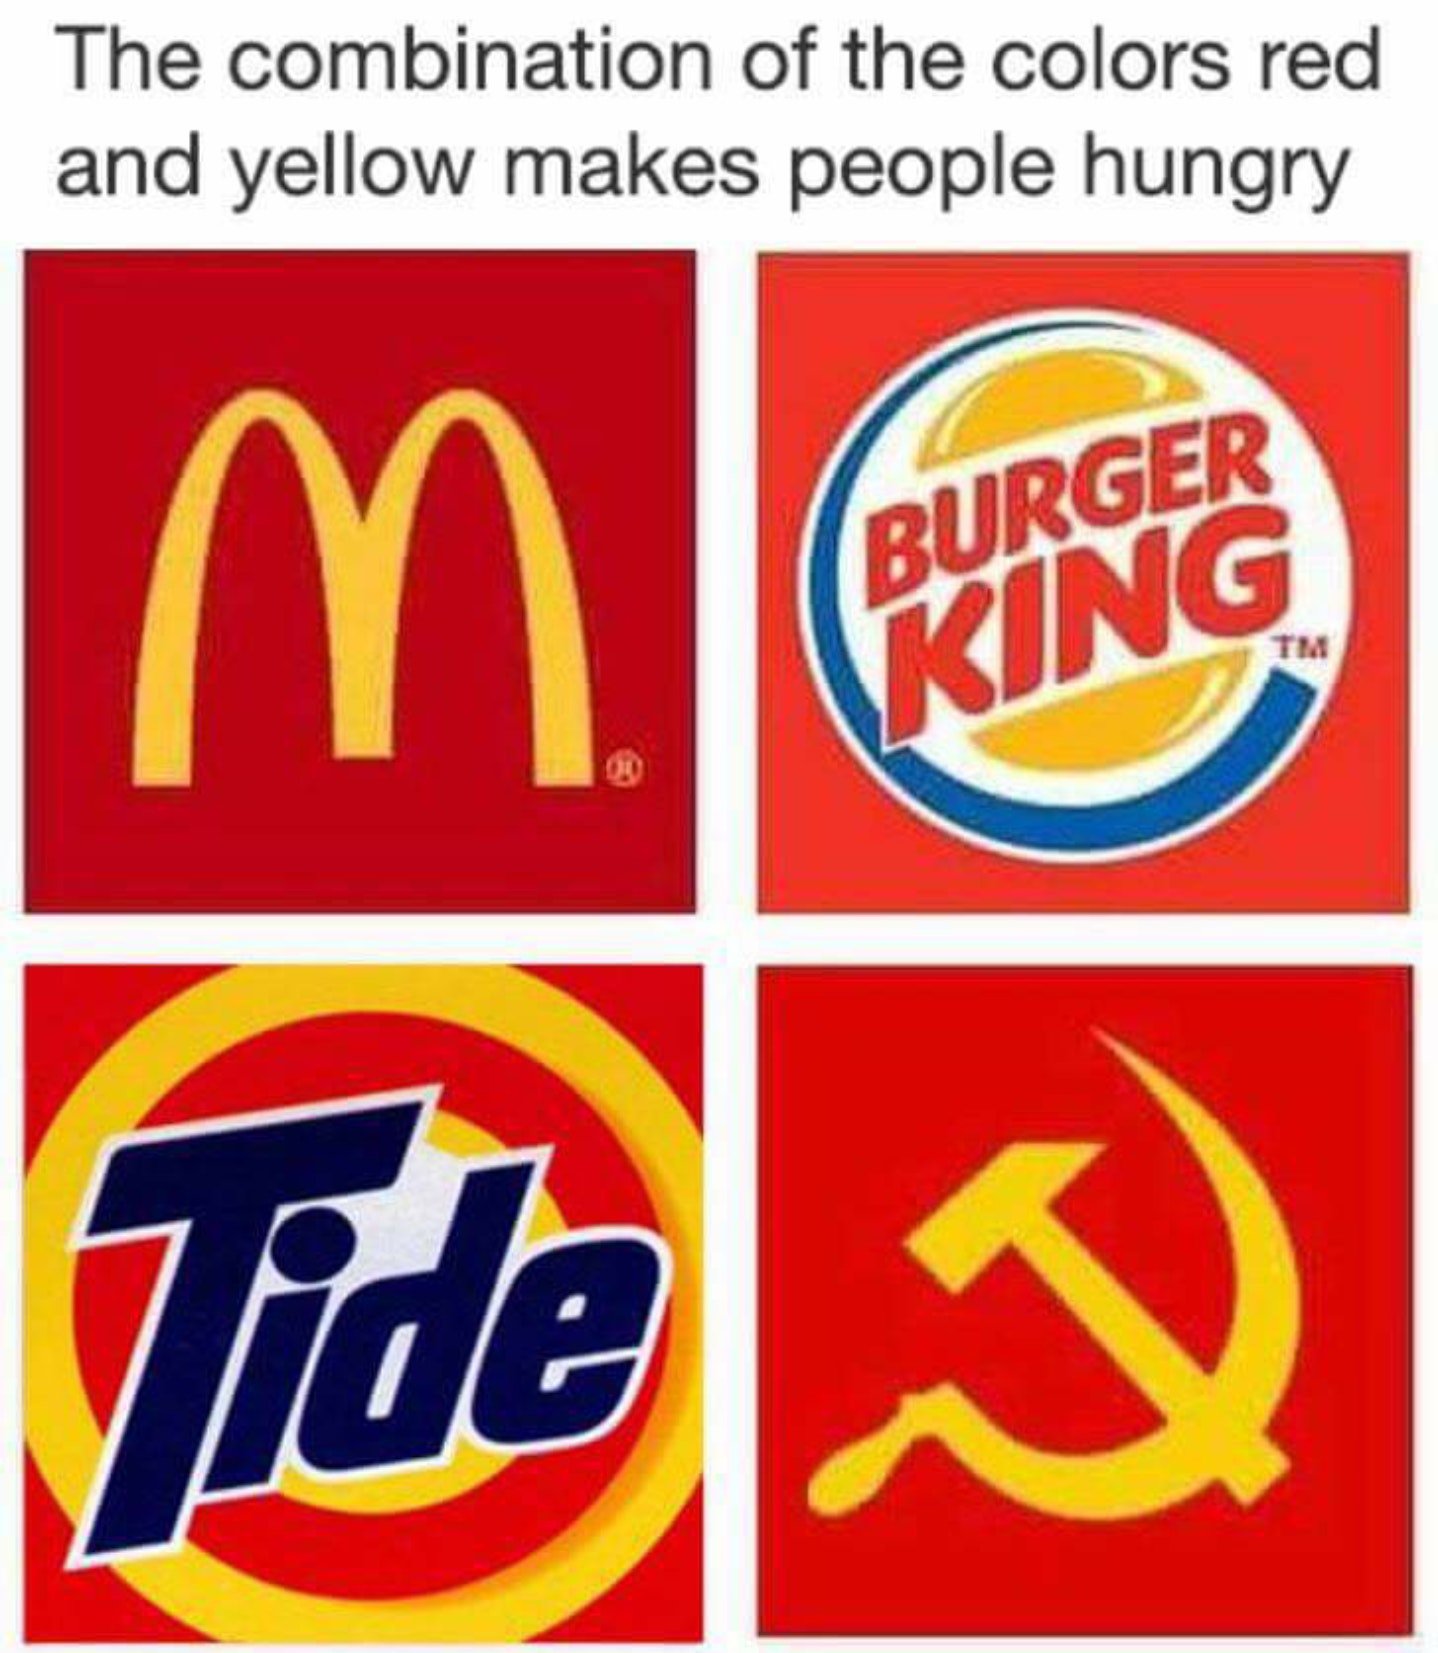 dank meme - red and yellow make you hungry - The combination of the colors red and yellow makes people hungry Burger Ring